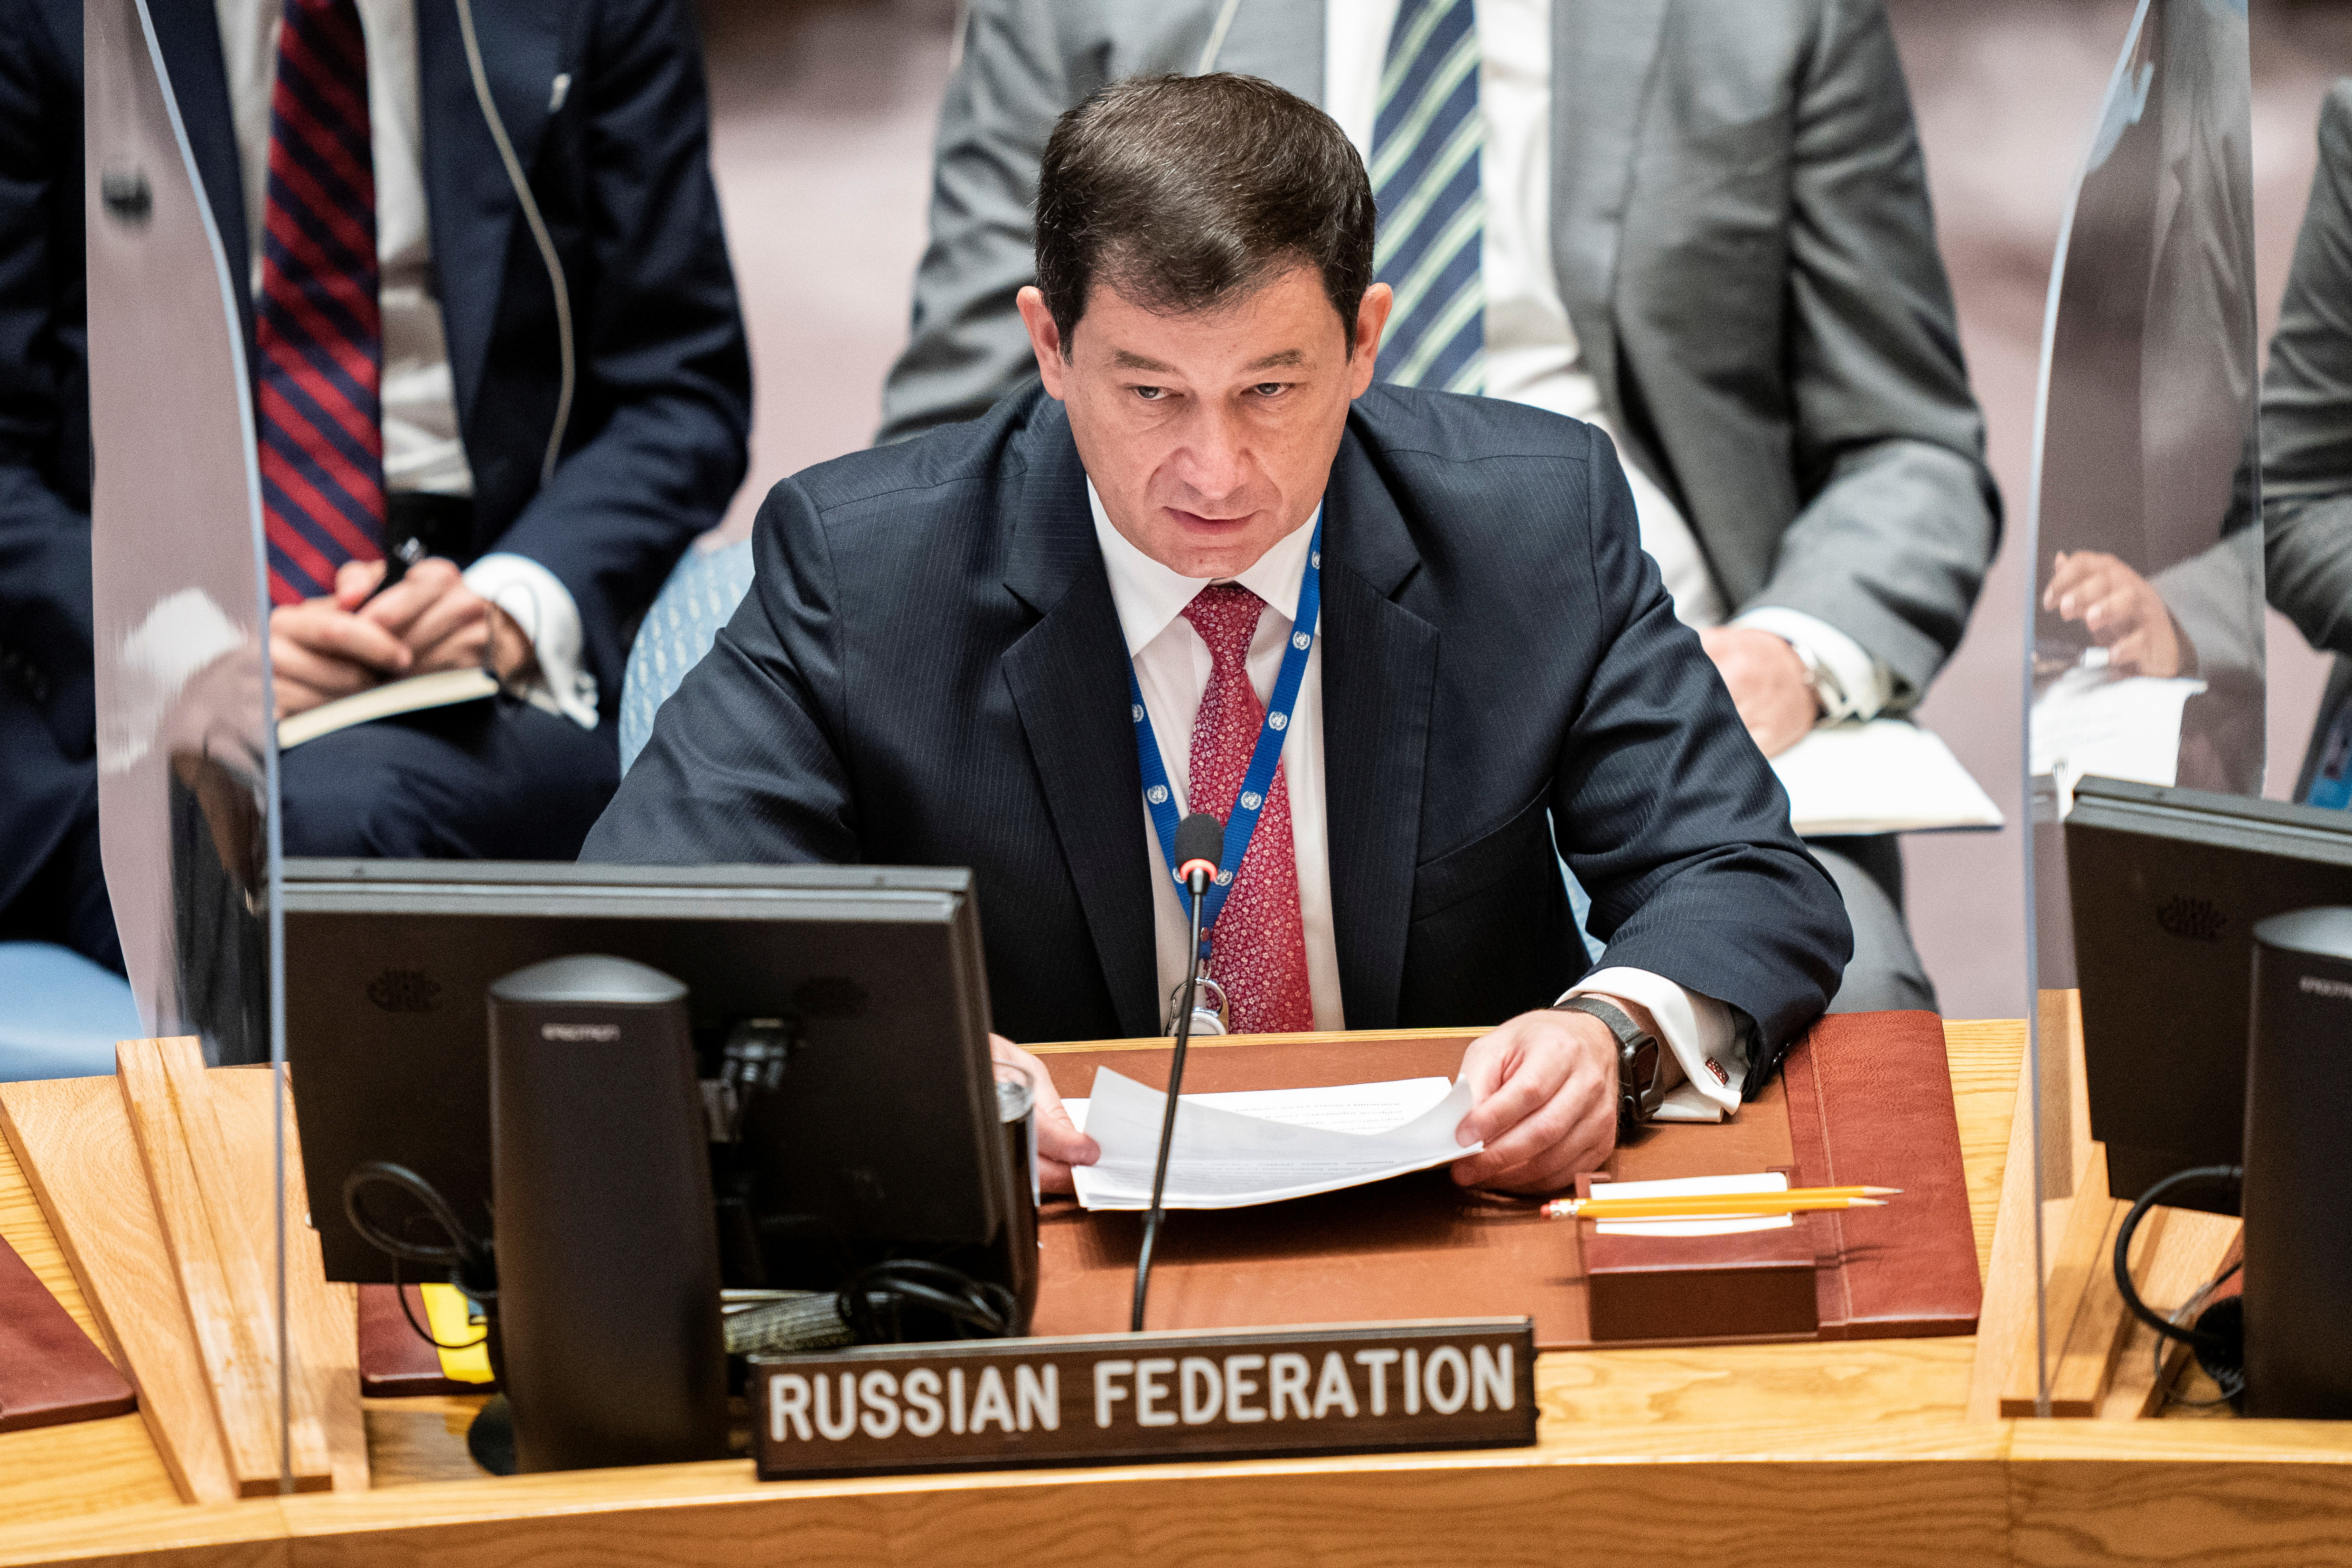 First Deputy Permanent Representative of Russia to the United Nation Dmitry Polyanskiy speaks during a meeting of the United Nations Security Council at the 76th Session of the U.N. General Assembly in New York, U.S. September 23, 2021. John Minchillo/Pool via REUTERS